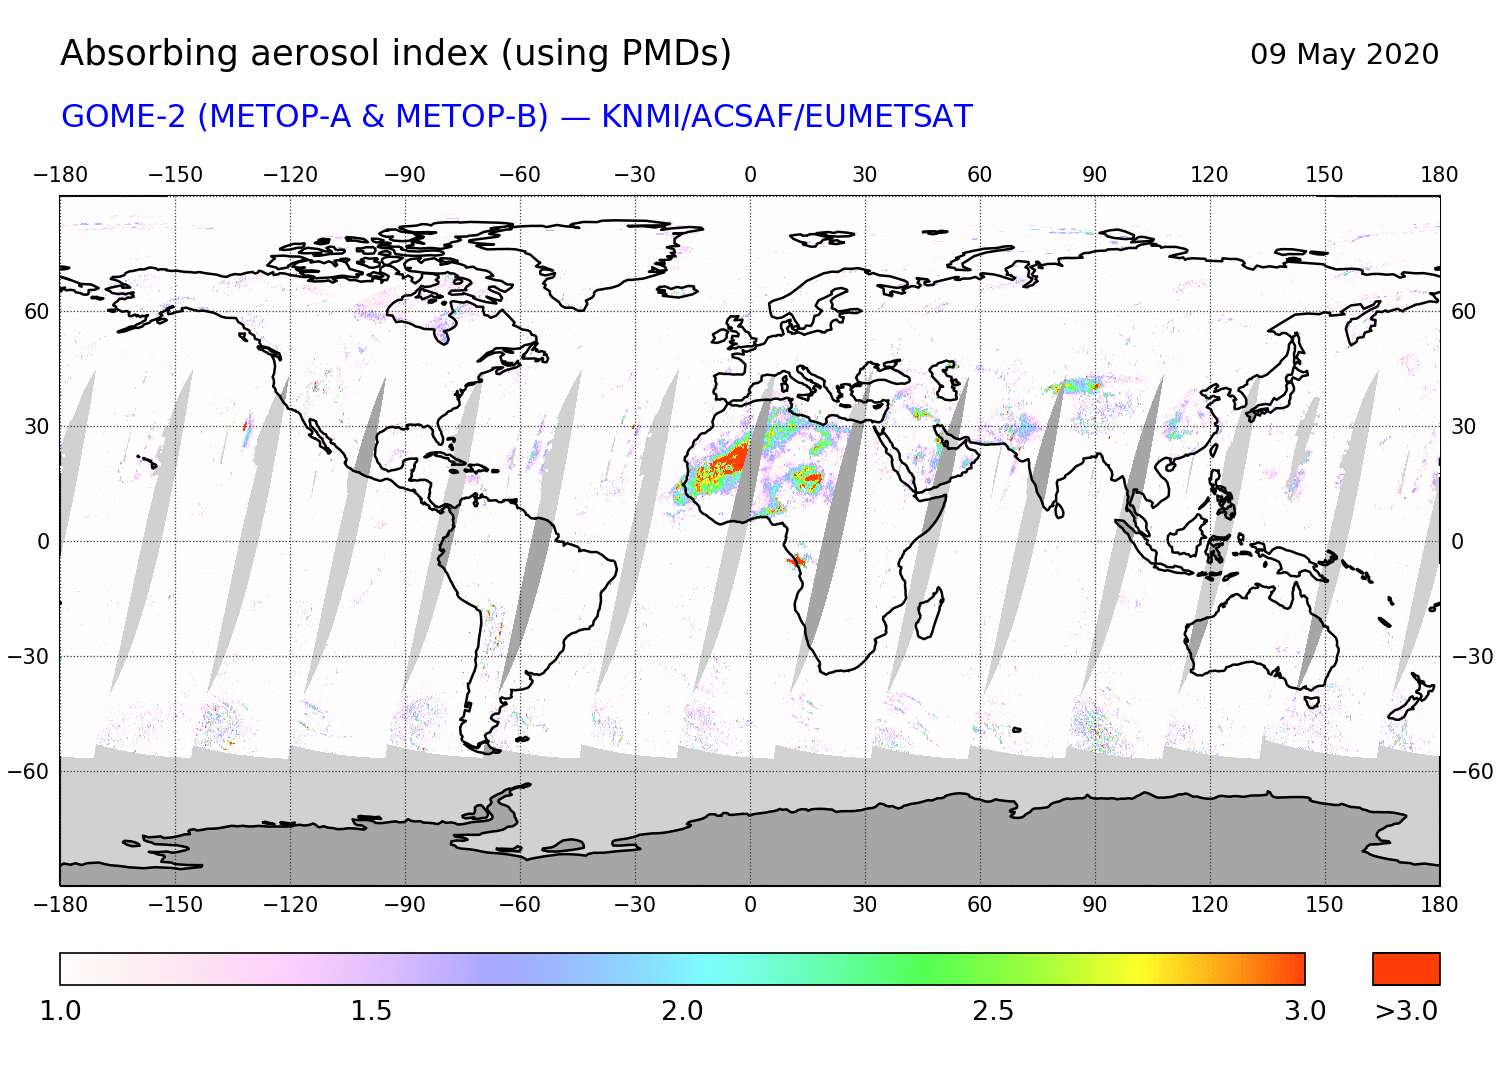 GOME-2 - Absorbing aerosol index of 09 May 2020